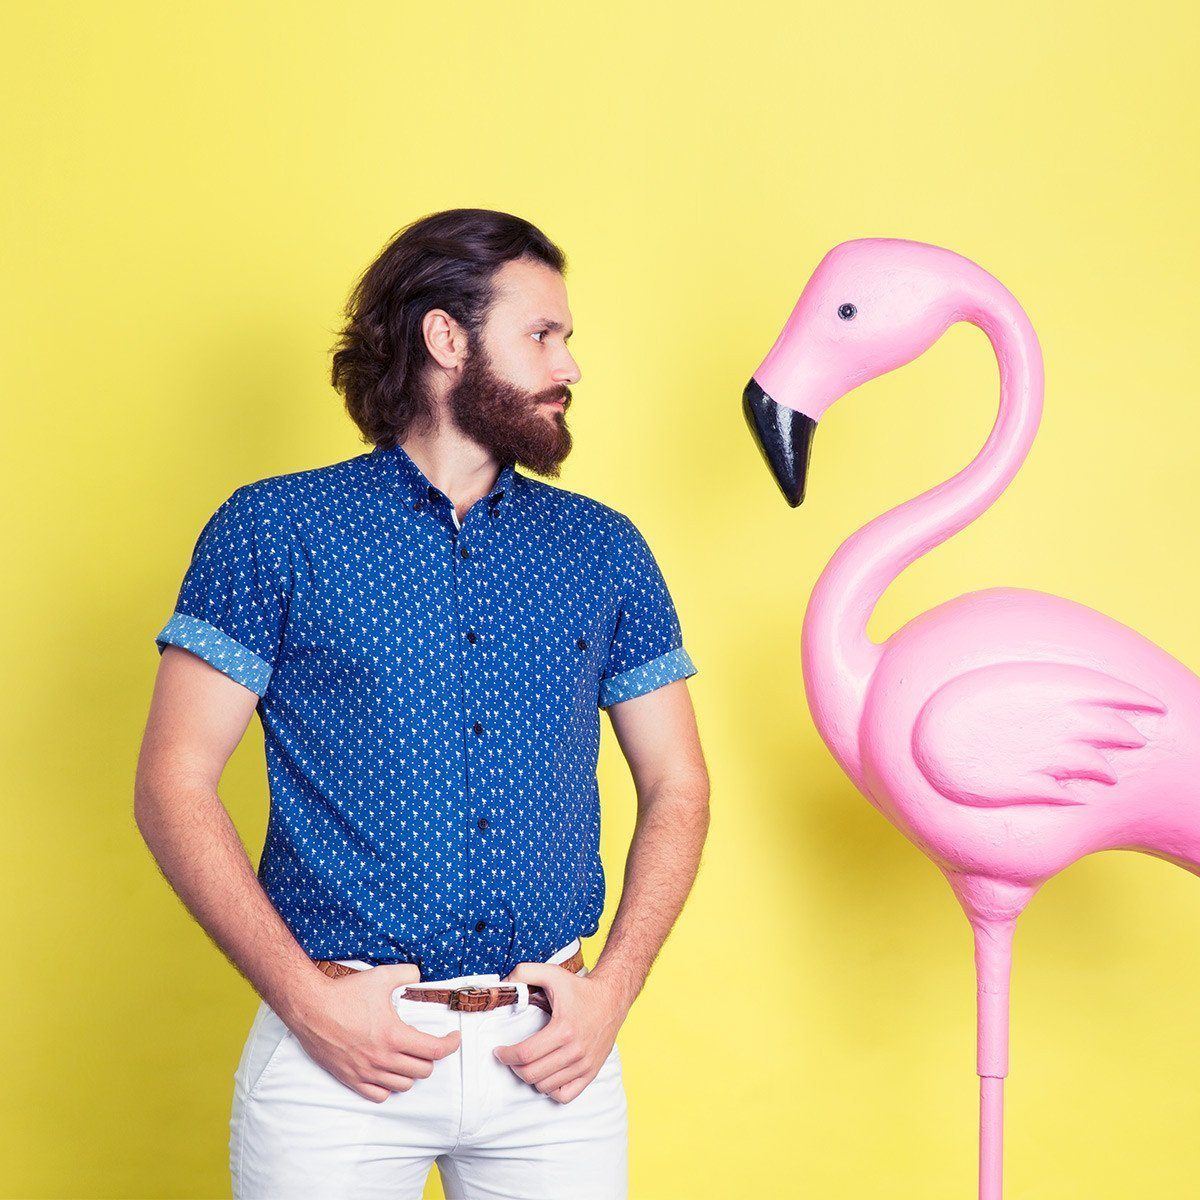 Mens Short Sleeve Shirt - A Slim Fit Button-Down in Navy Blue with White Flamingoes by MR. KOYA